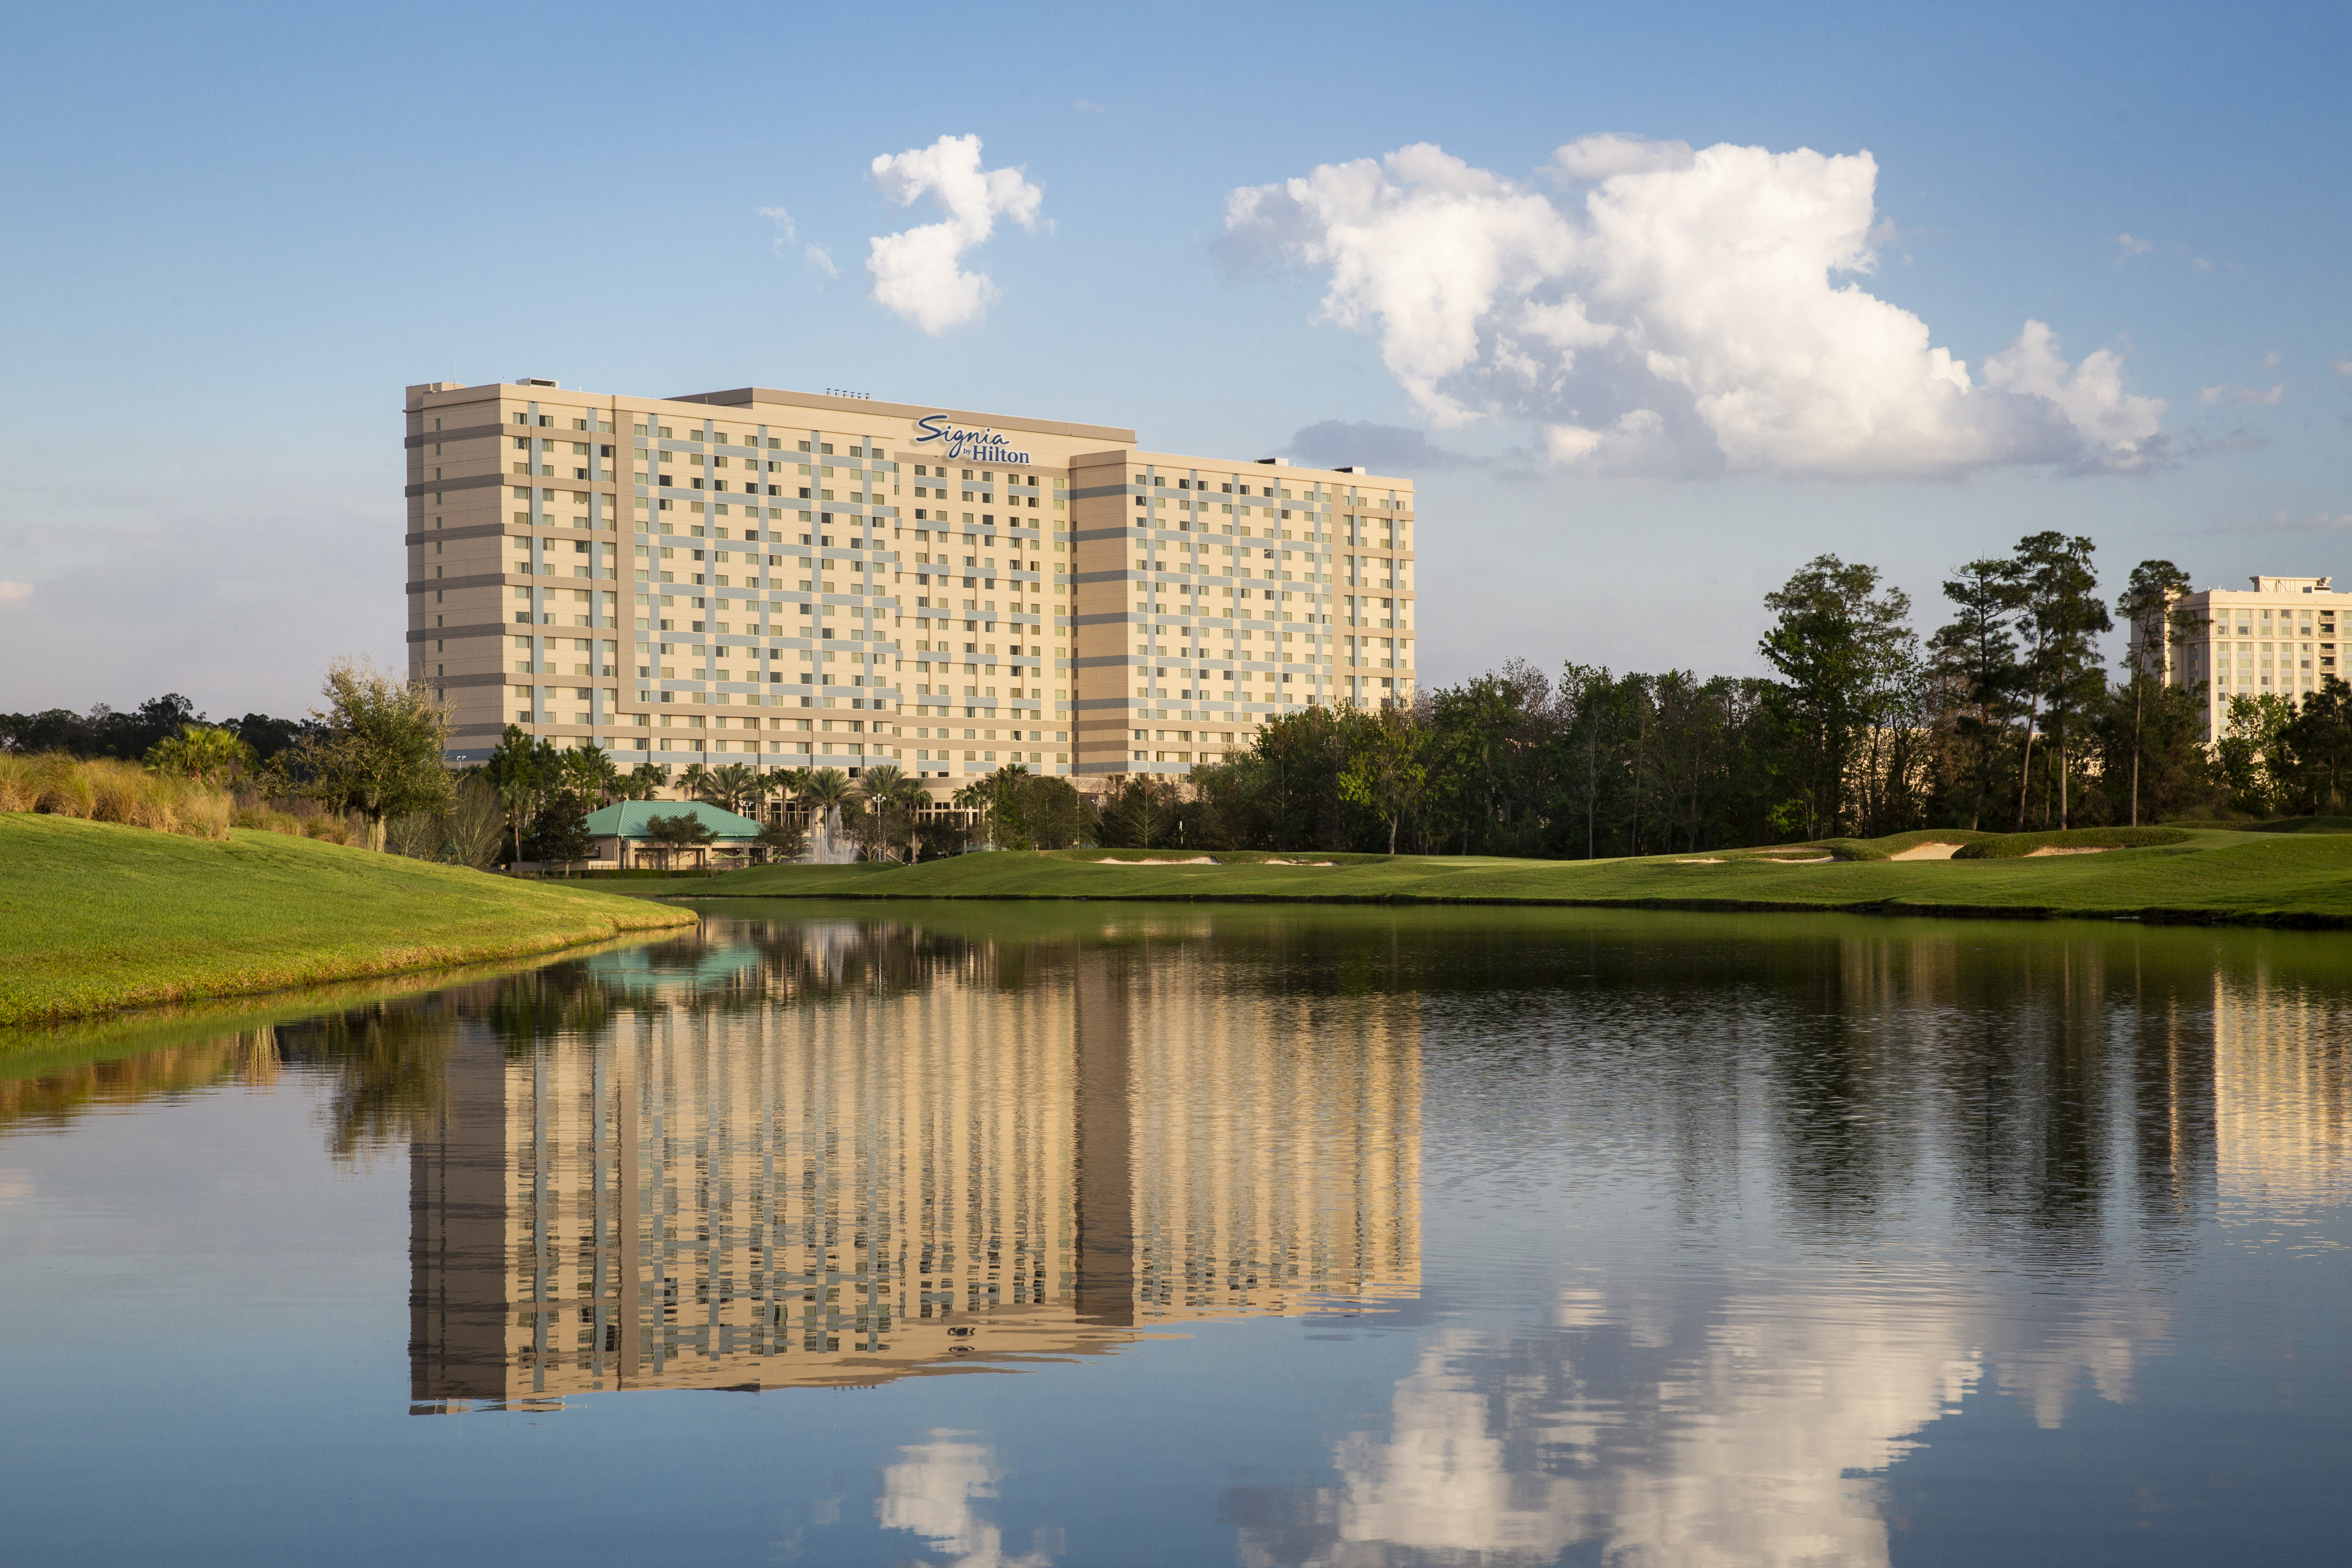 View of Signia by Hilton Orlando from across a pond.